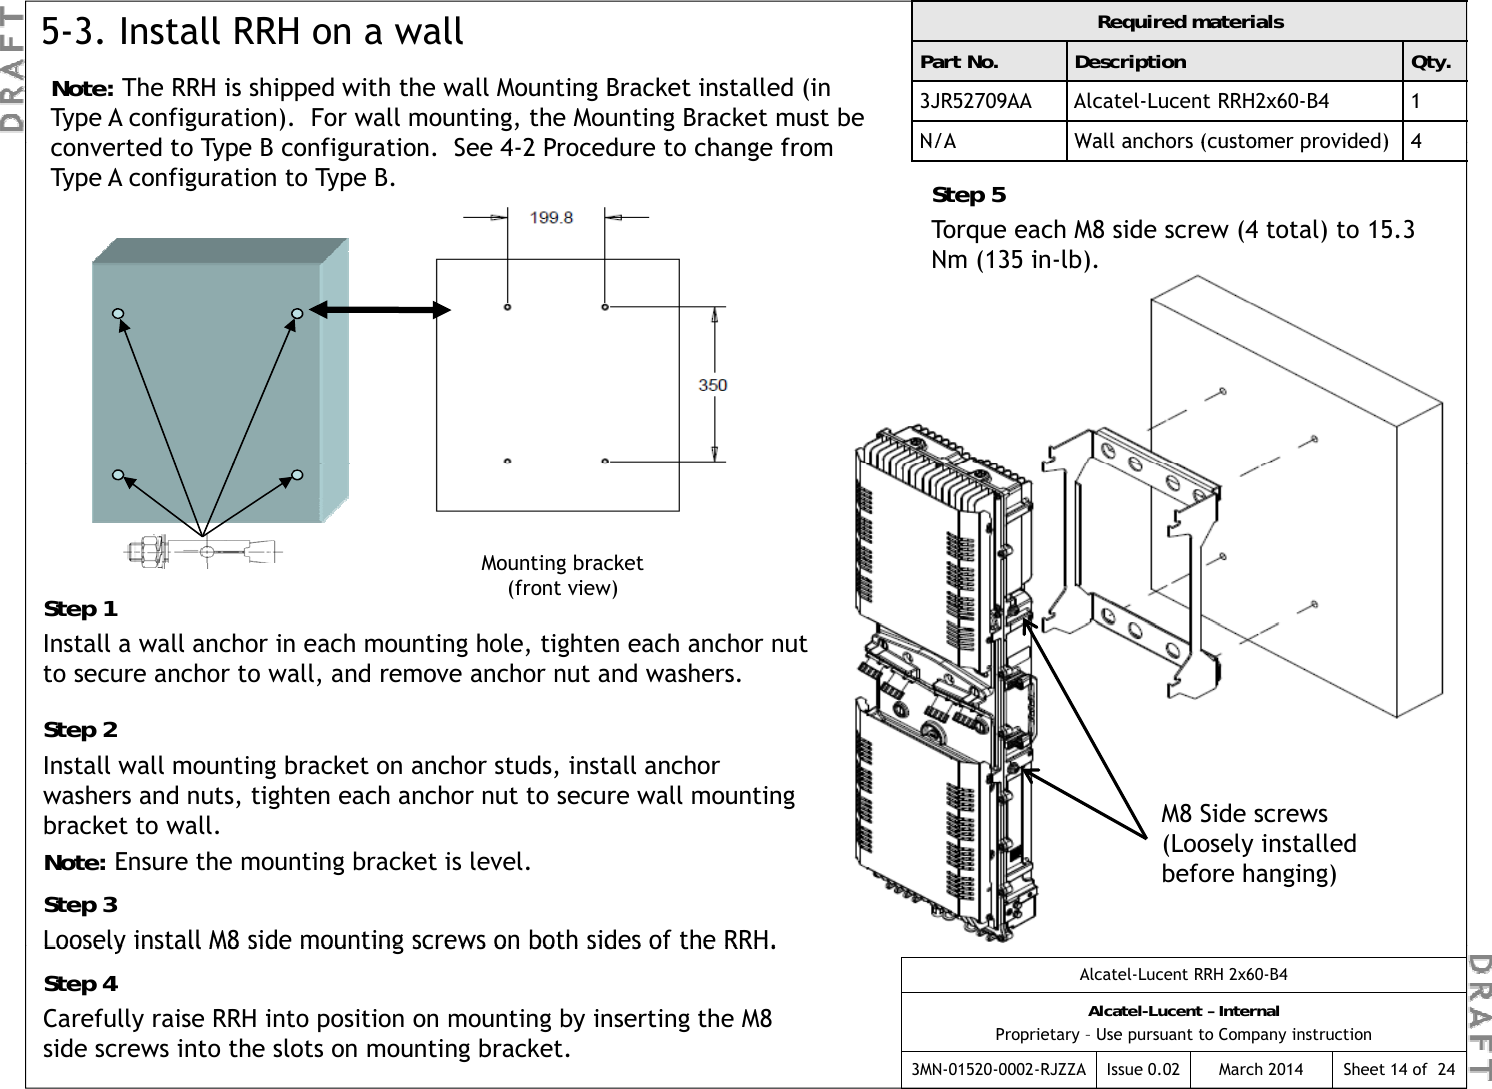 Note: The RRH is shipped with the wall Mounting Bracket installed (in Type A configuration).  For wall mounting, the Mounting Bracket must be td t T  B  fig ti   S  42 P d  t   h g  f  Required materialsPart No. Description Qty.3JR52709AA Alcatel-Lucent RRH2x60-B4 1N/AWallanchors (customer provided)45-3. Install RRH on a wallconverted to Type B configuration.  See 4-2 Procedure to change from Type A configuration to Type B.N/AWallanchors (customer provided)4Step 5Torque each M8 side screw (4 total) to 15.3 Nm (135 in-lb).Step 1Mounting bracket(front view)Install a wall anchor in each mounting hole, tighten each anchor nut to secure anchor to wall, and remove anchor nut and washers.Step 2Install wall mounting bracket on anchor studs, install anchor M8 Side screws (Loosely installed before hanging)washers and nuts, tighten each anchor nut to secure wall mounting bracket to wall.Note: Ensure the mounting bracket is level.Step 3Loosely install M8 side mounting screws on both sides of the RRH.Alcatel-Lucent RRH 2x60-B4Alcatel-Lucent – InternalProprietary – Use pursuant to Company instruction3MN-01520-0002-RJZZA Issue 0.02 March 2014Loosely install M8 side mounting screws on both sides of the RRH.Step 4Carefully raise RRH into position on mounting by inserting the M8 side screws into the slots on mounting bracket.Sheet 14 of  24